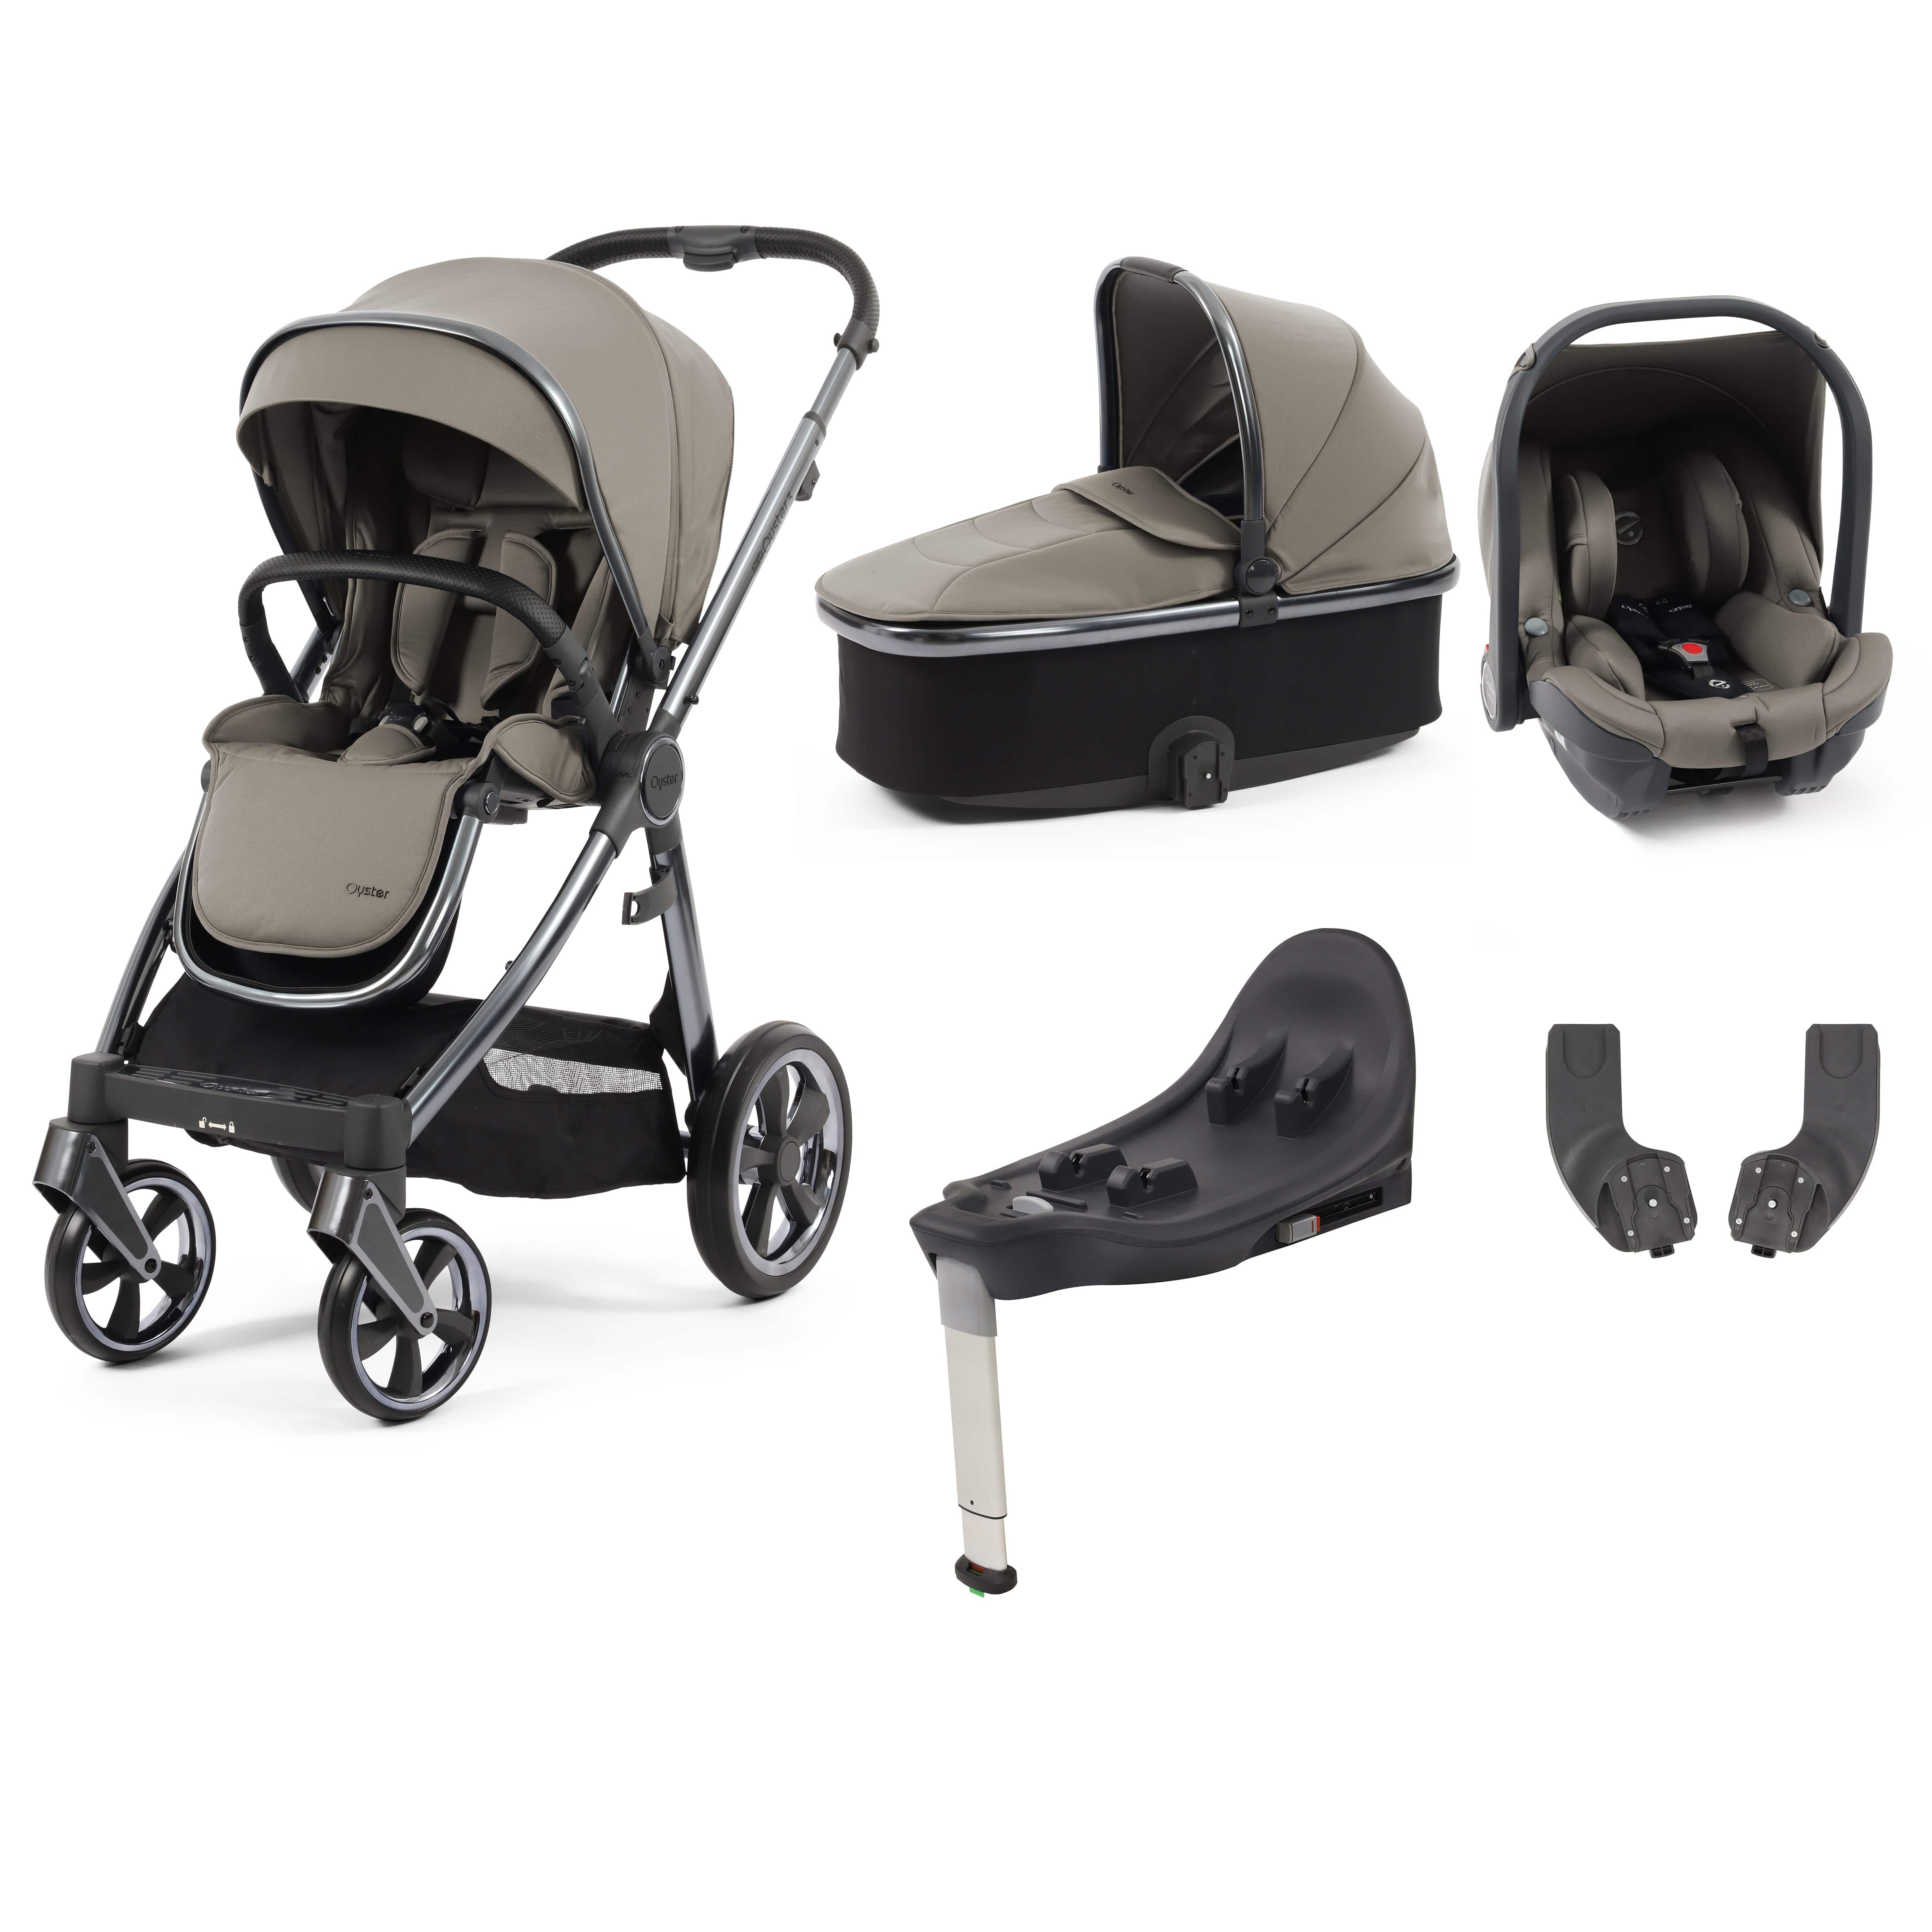 Babystyle Oyster 3 Essential Bundle with Car Seat in Stone Travel Systems 14746-STN 5060711567259